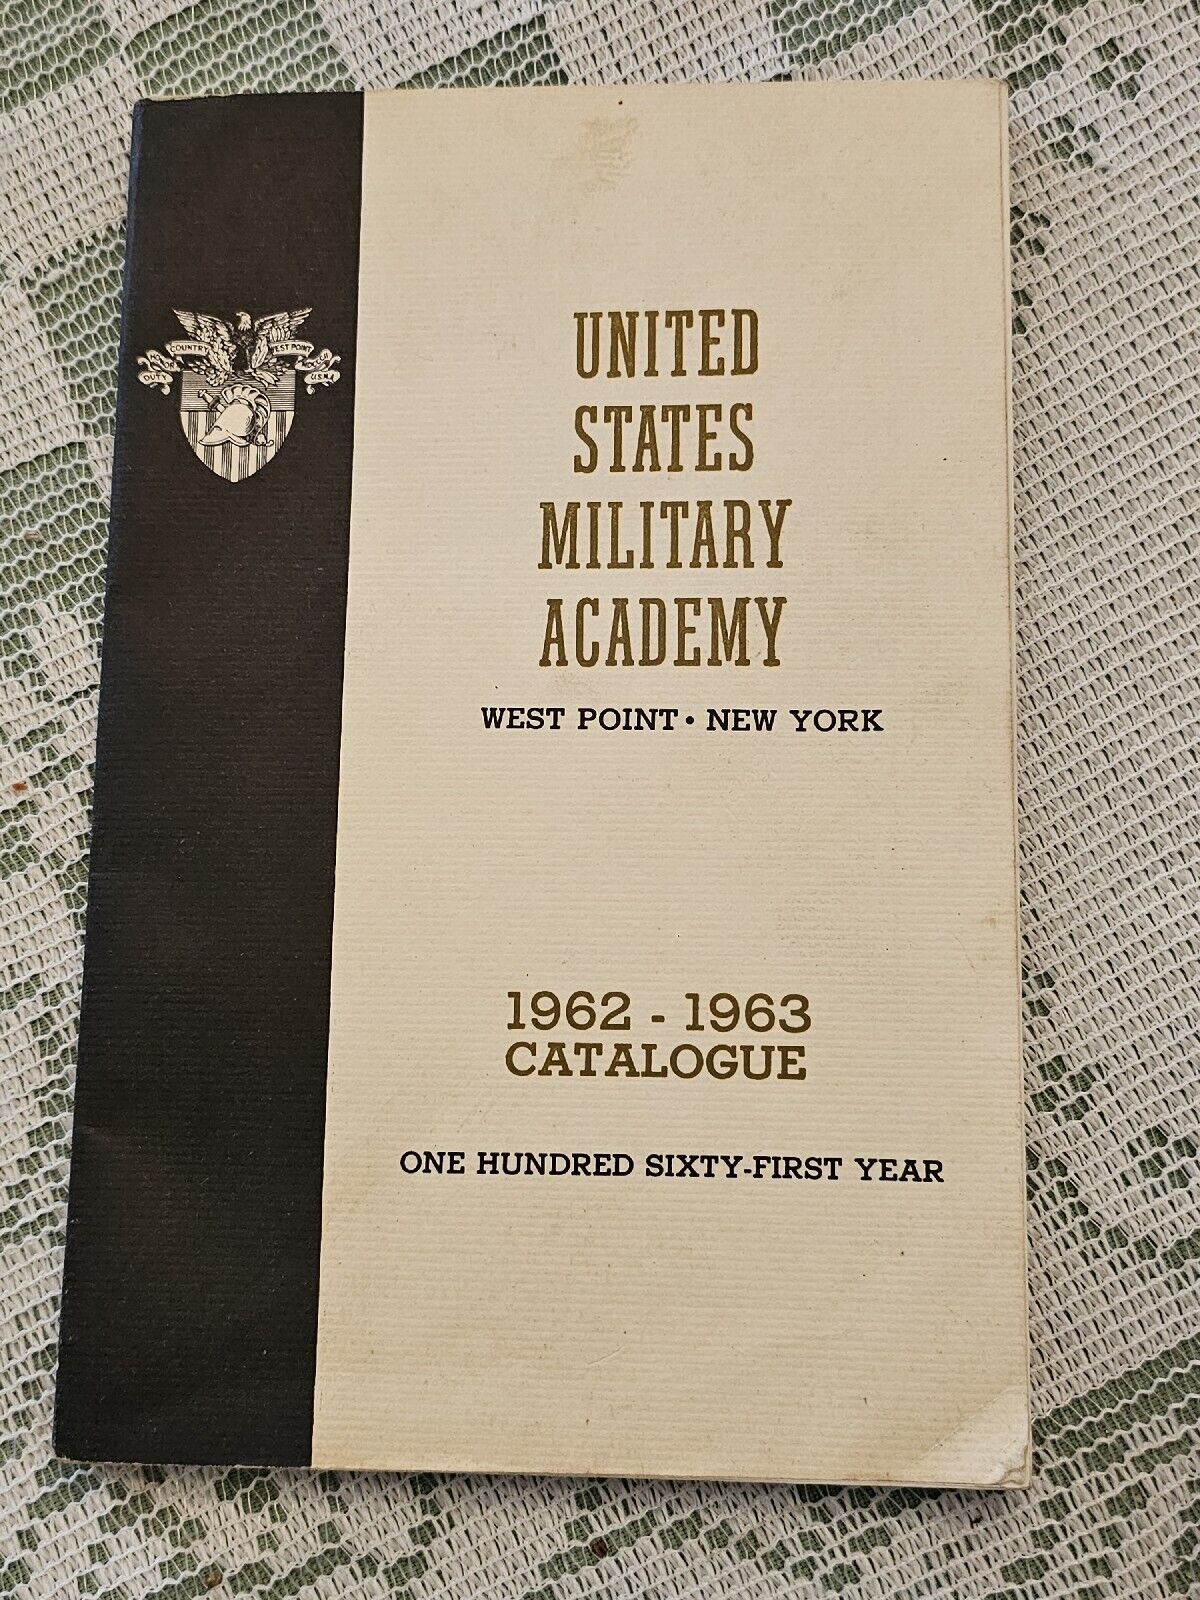 UNITED STATES MILITARY ACADEMY WEST POINT 1962 1963 CATALOGUE